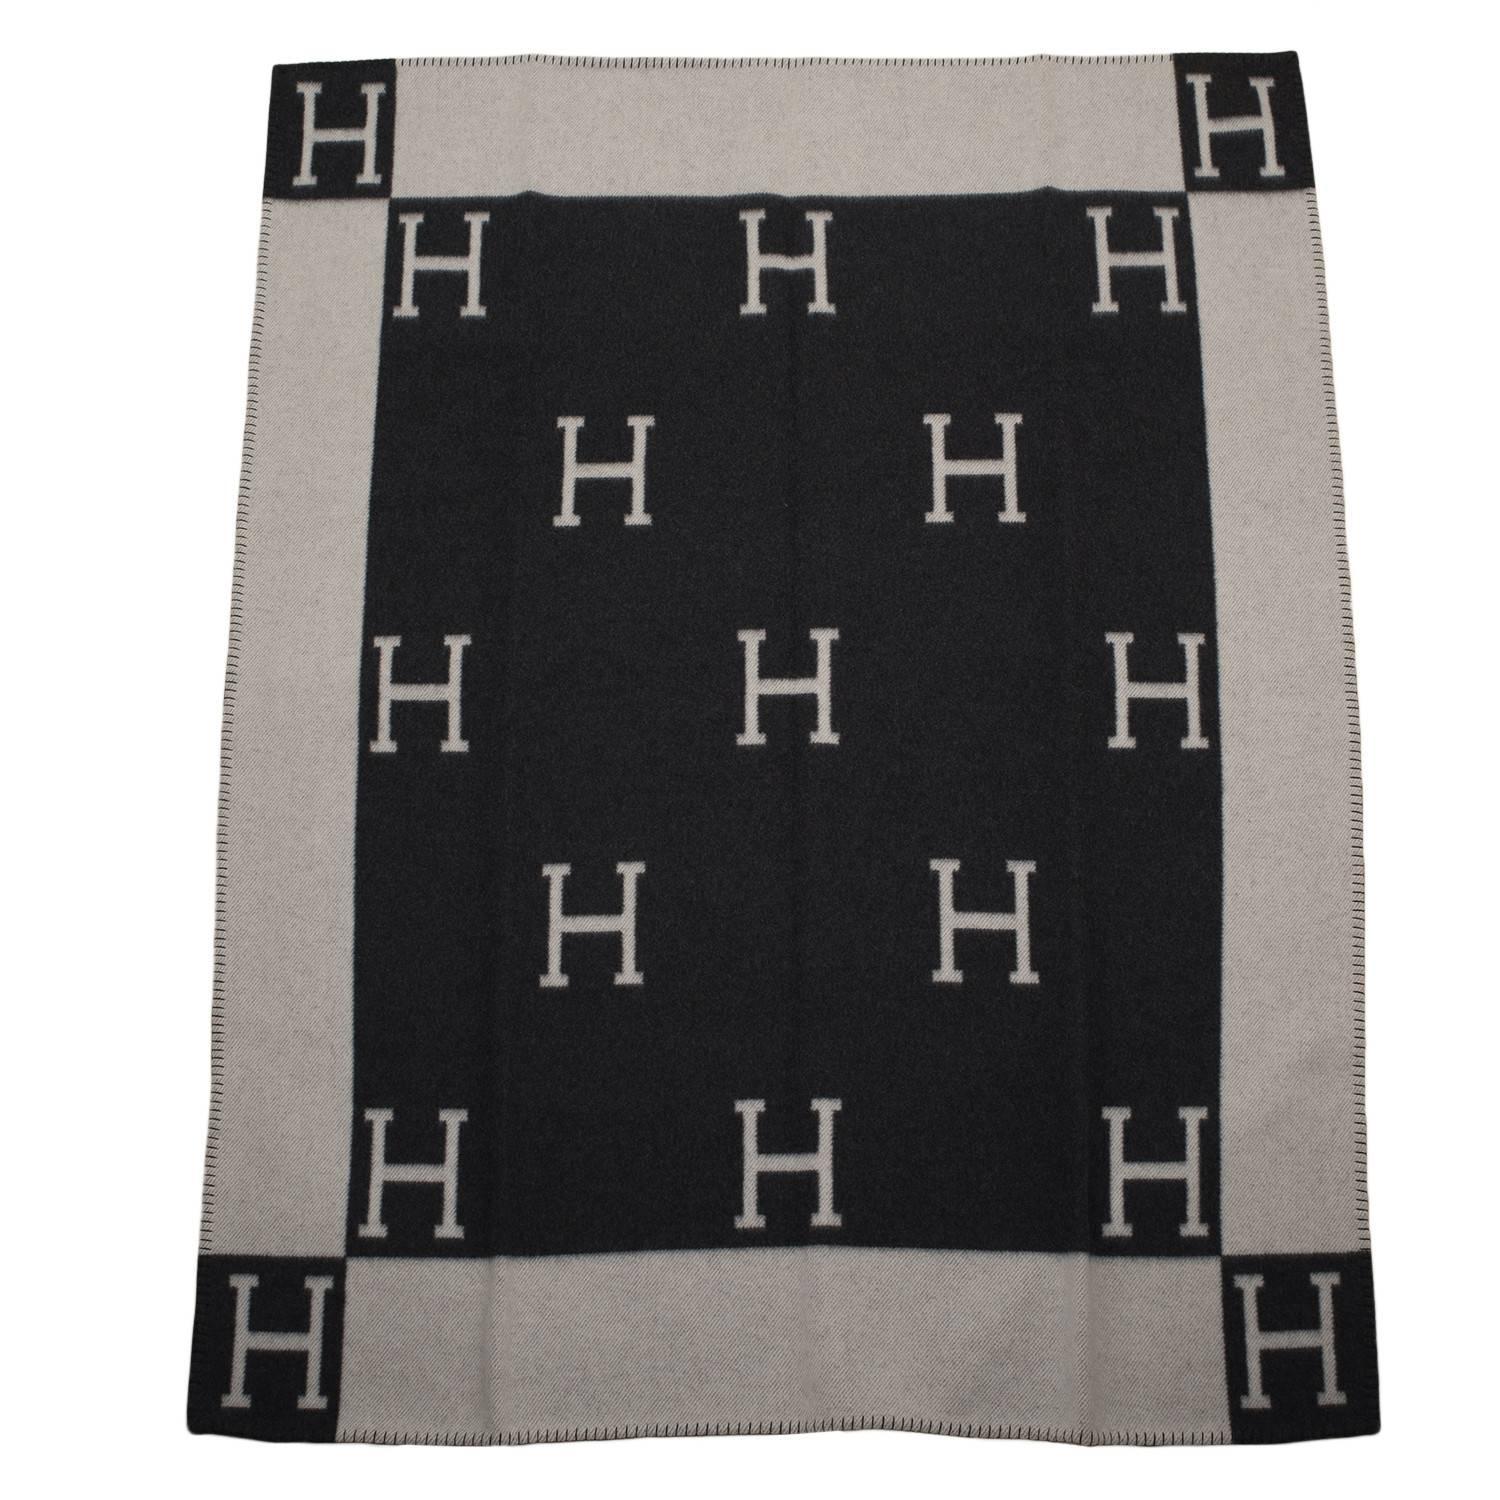 Hermes New Classic Avalon blanket in gris fonce and ecru made of  90% wool, 10% cashmere.

Collection: New Classic

Origin: Great Britain

Condition: Pristine, Store fresh condition

Accompanied by: Box

Measurements: 53